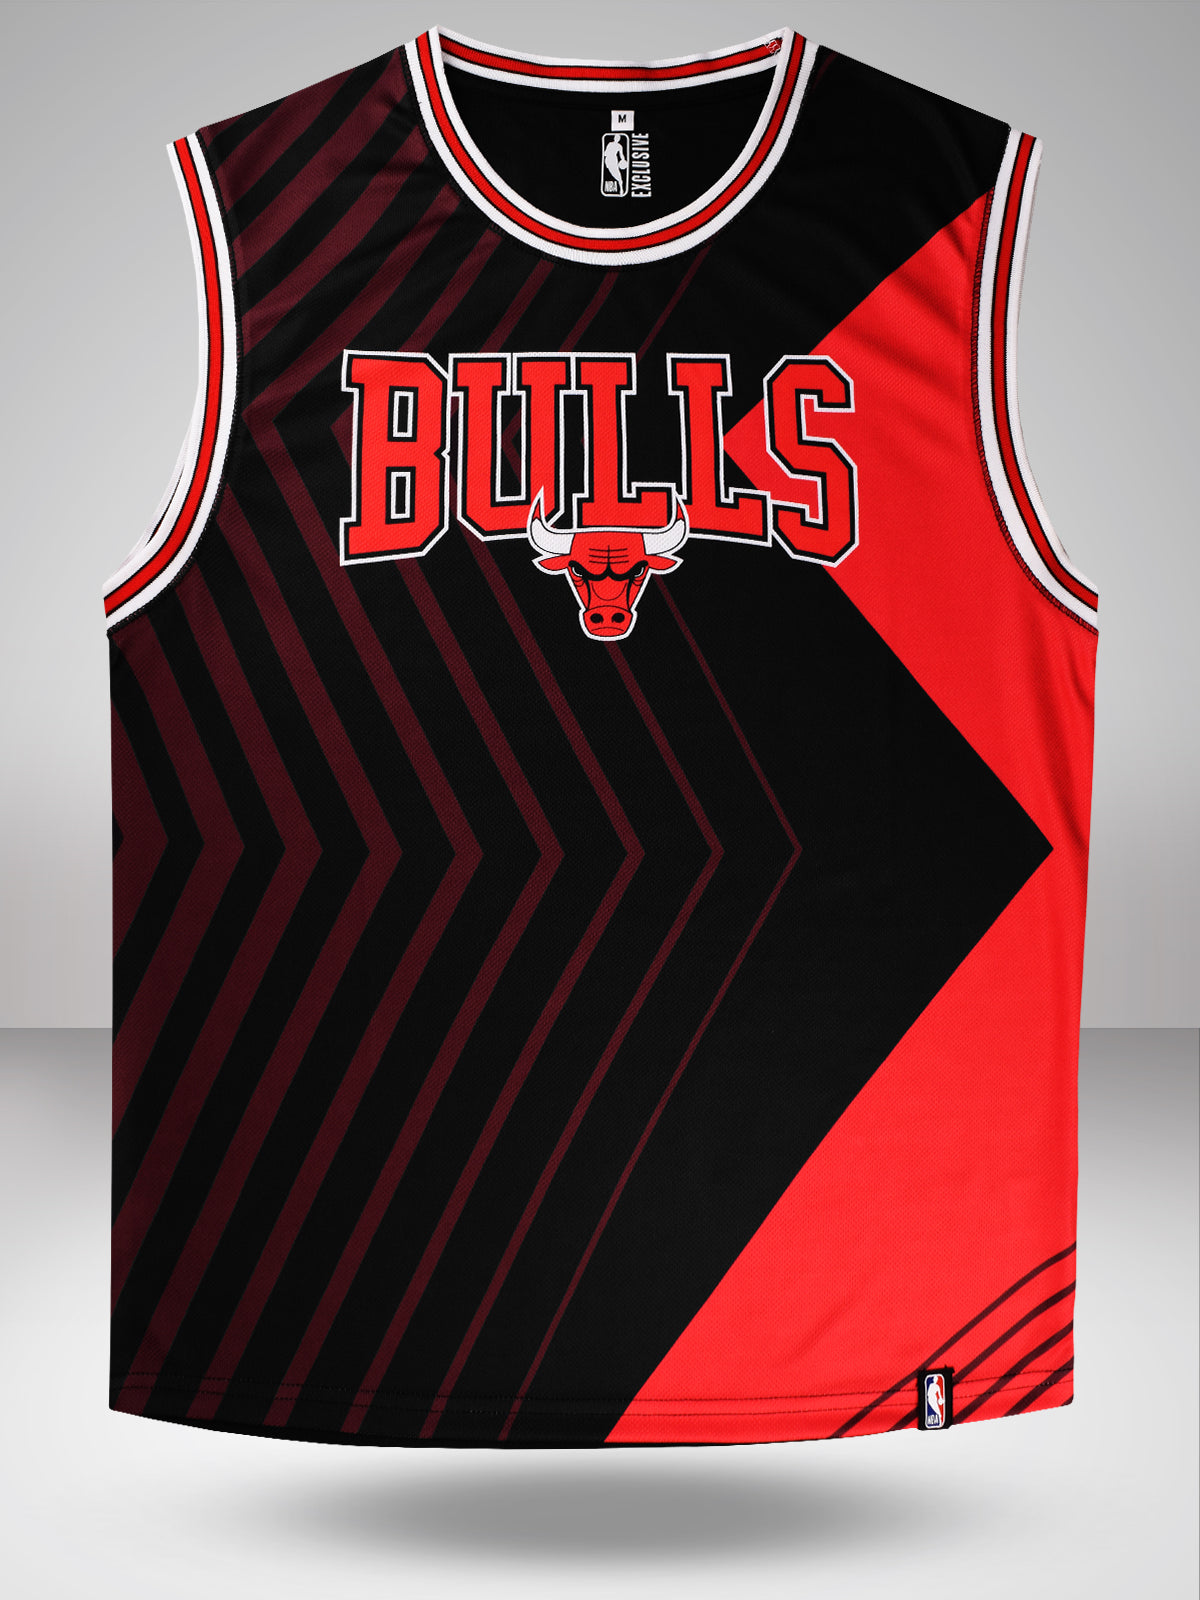 The Bulls are not fans of the black jerseys or sleeves